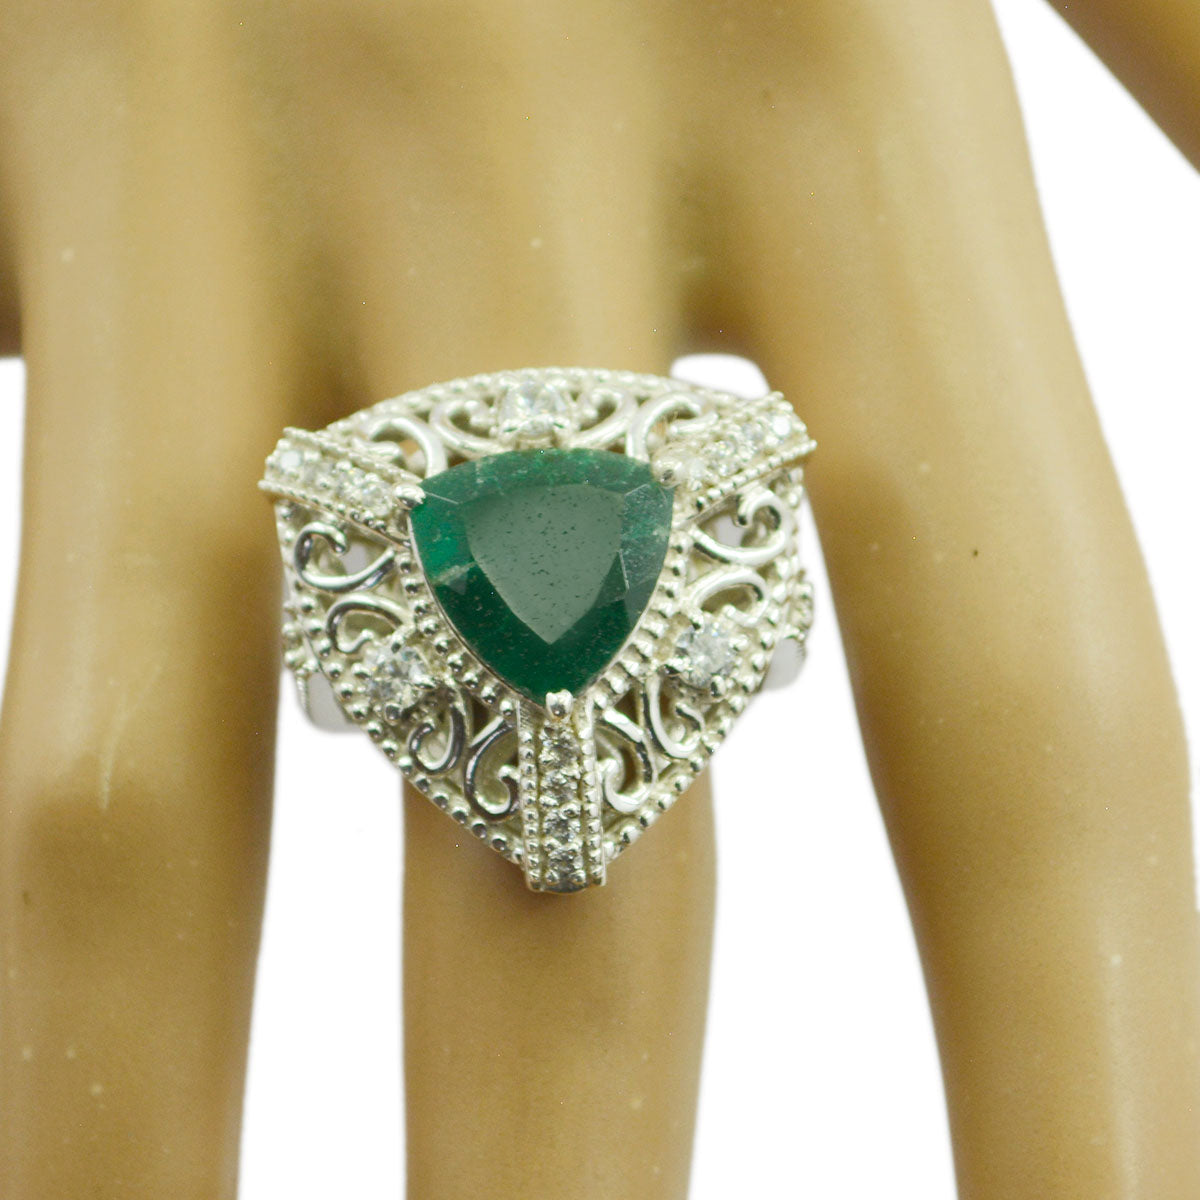 Indian Stone Indianemerald 925 Sterling Silver Ring Jewelry Logos